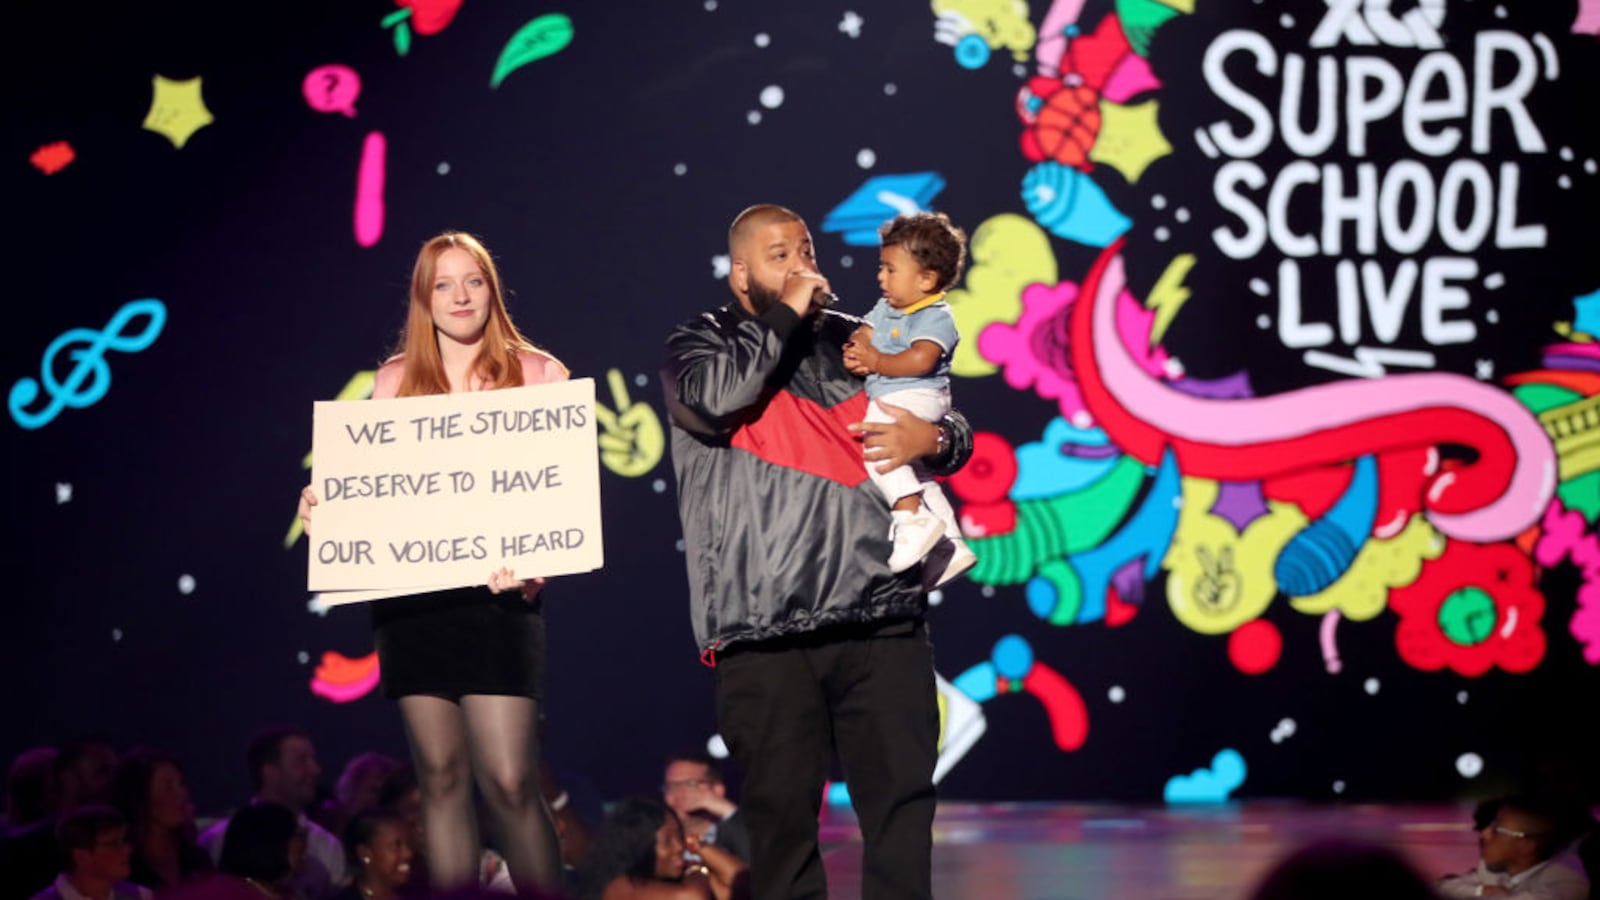 SANTA MONICA, CA - DJ Khaled (L) and son Asahd Tuck Khaled speak onstage during the XQ Super School Live, presented by EIF, at Barker Hangar on September 8, 2017 in California.